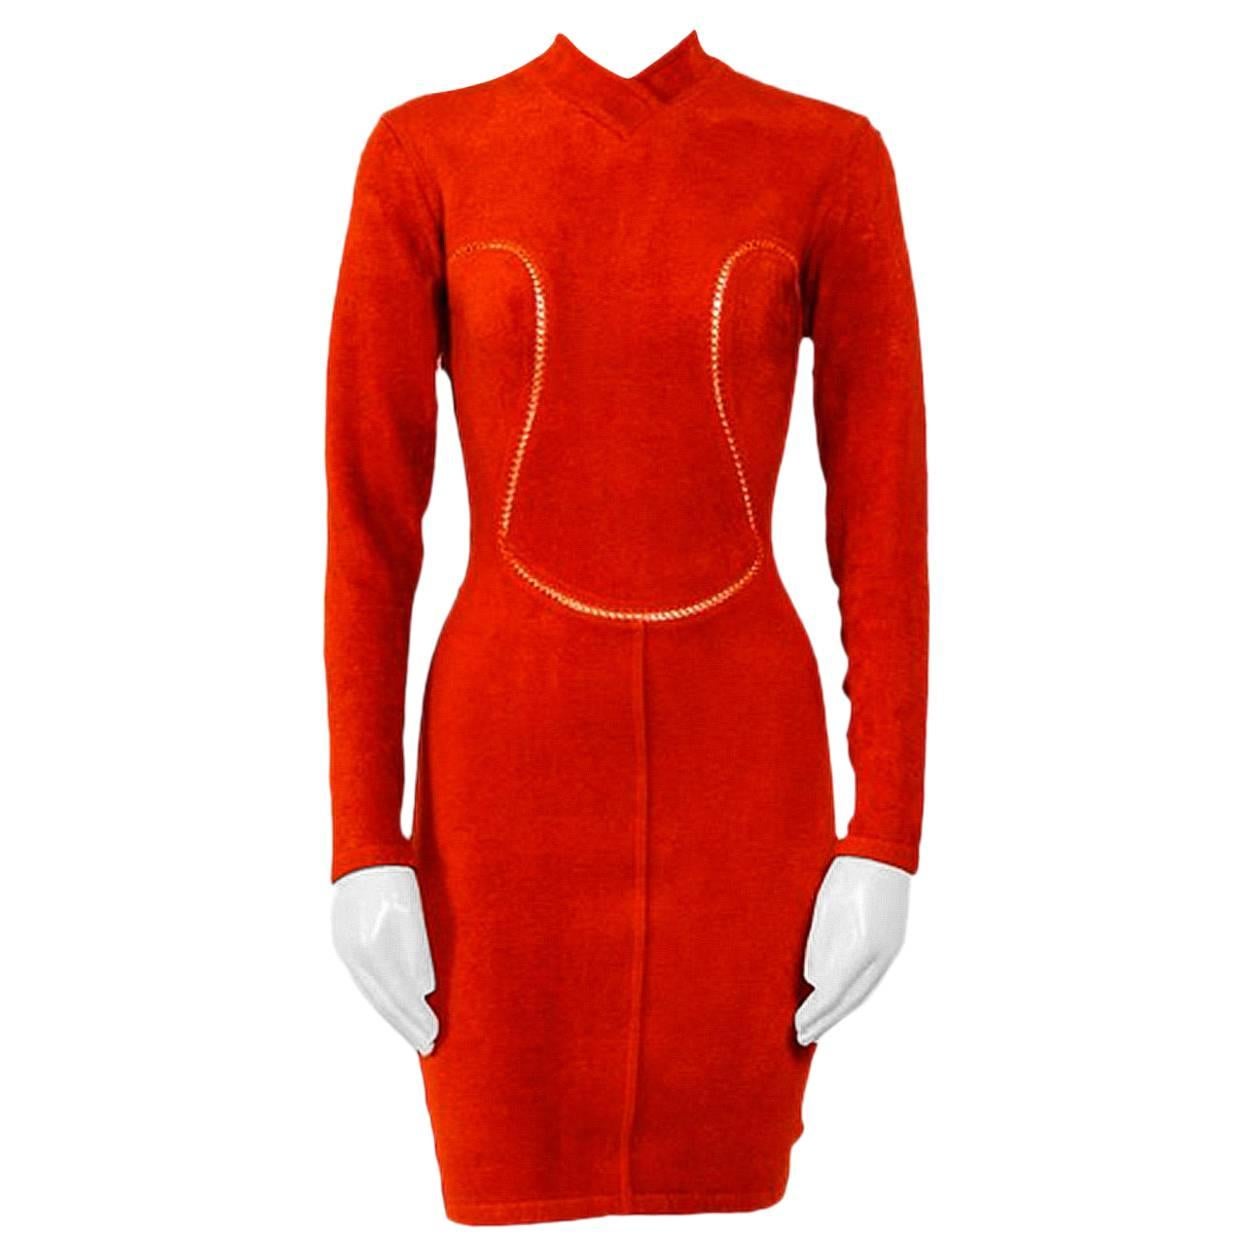 Alaia 1990s iconic red stretch dress